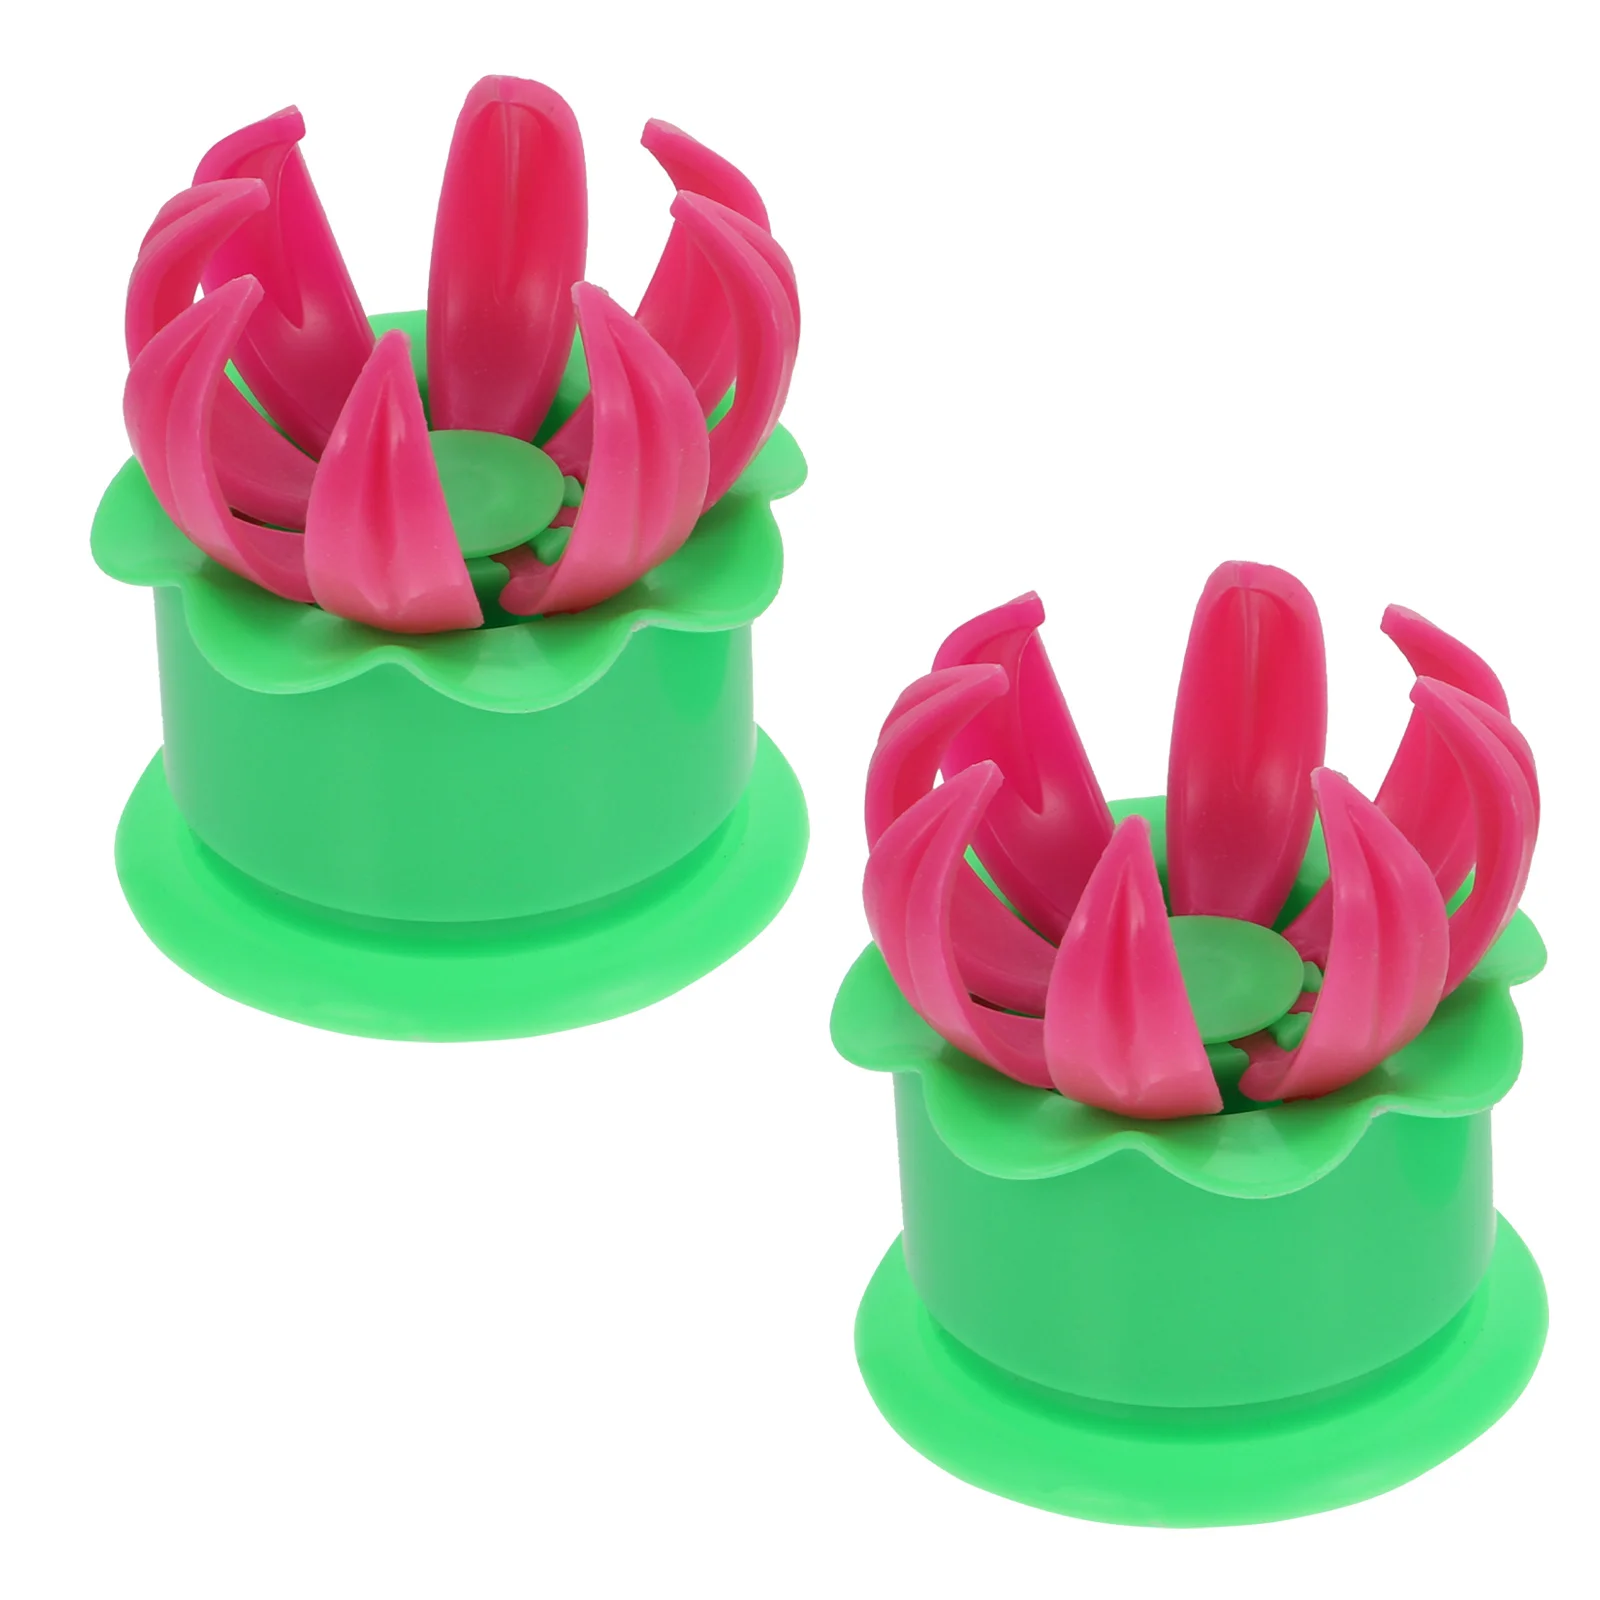 

2 Pcs Mom Mold Bun Mold Cooking Molds Pastry Making Home Supplies Kitchen Tools Dumpling Minced Meat Accessories